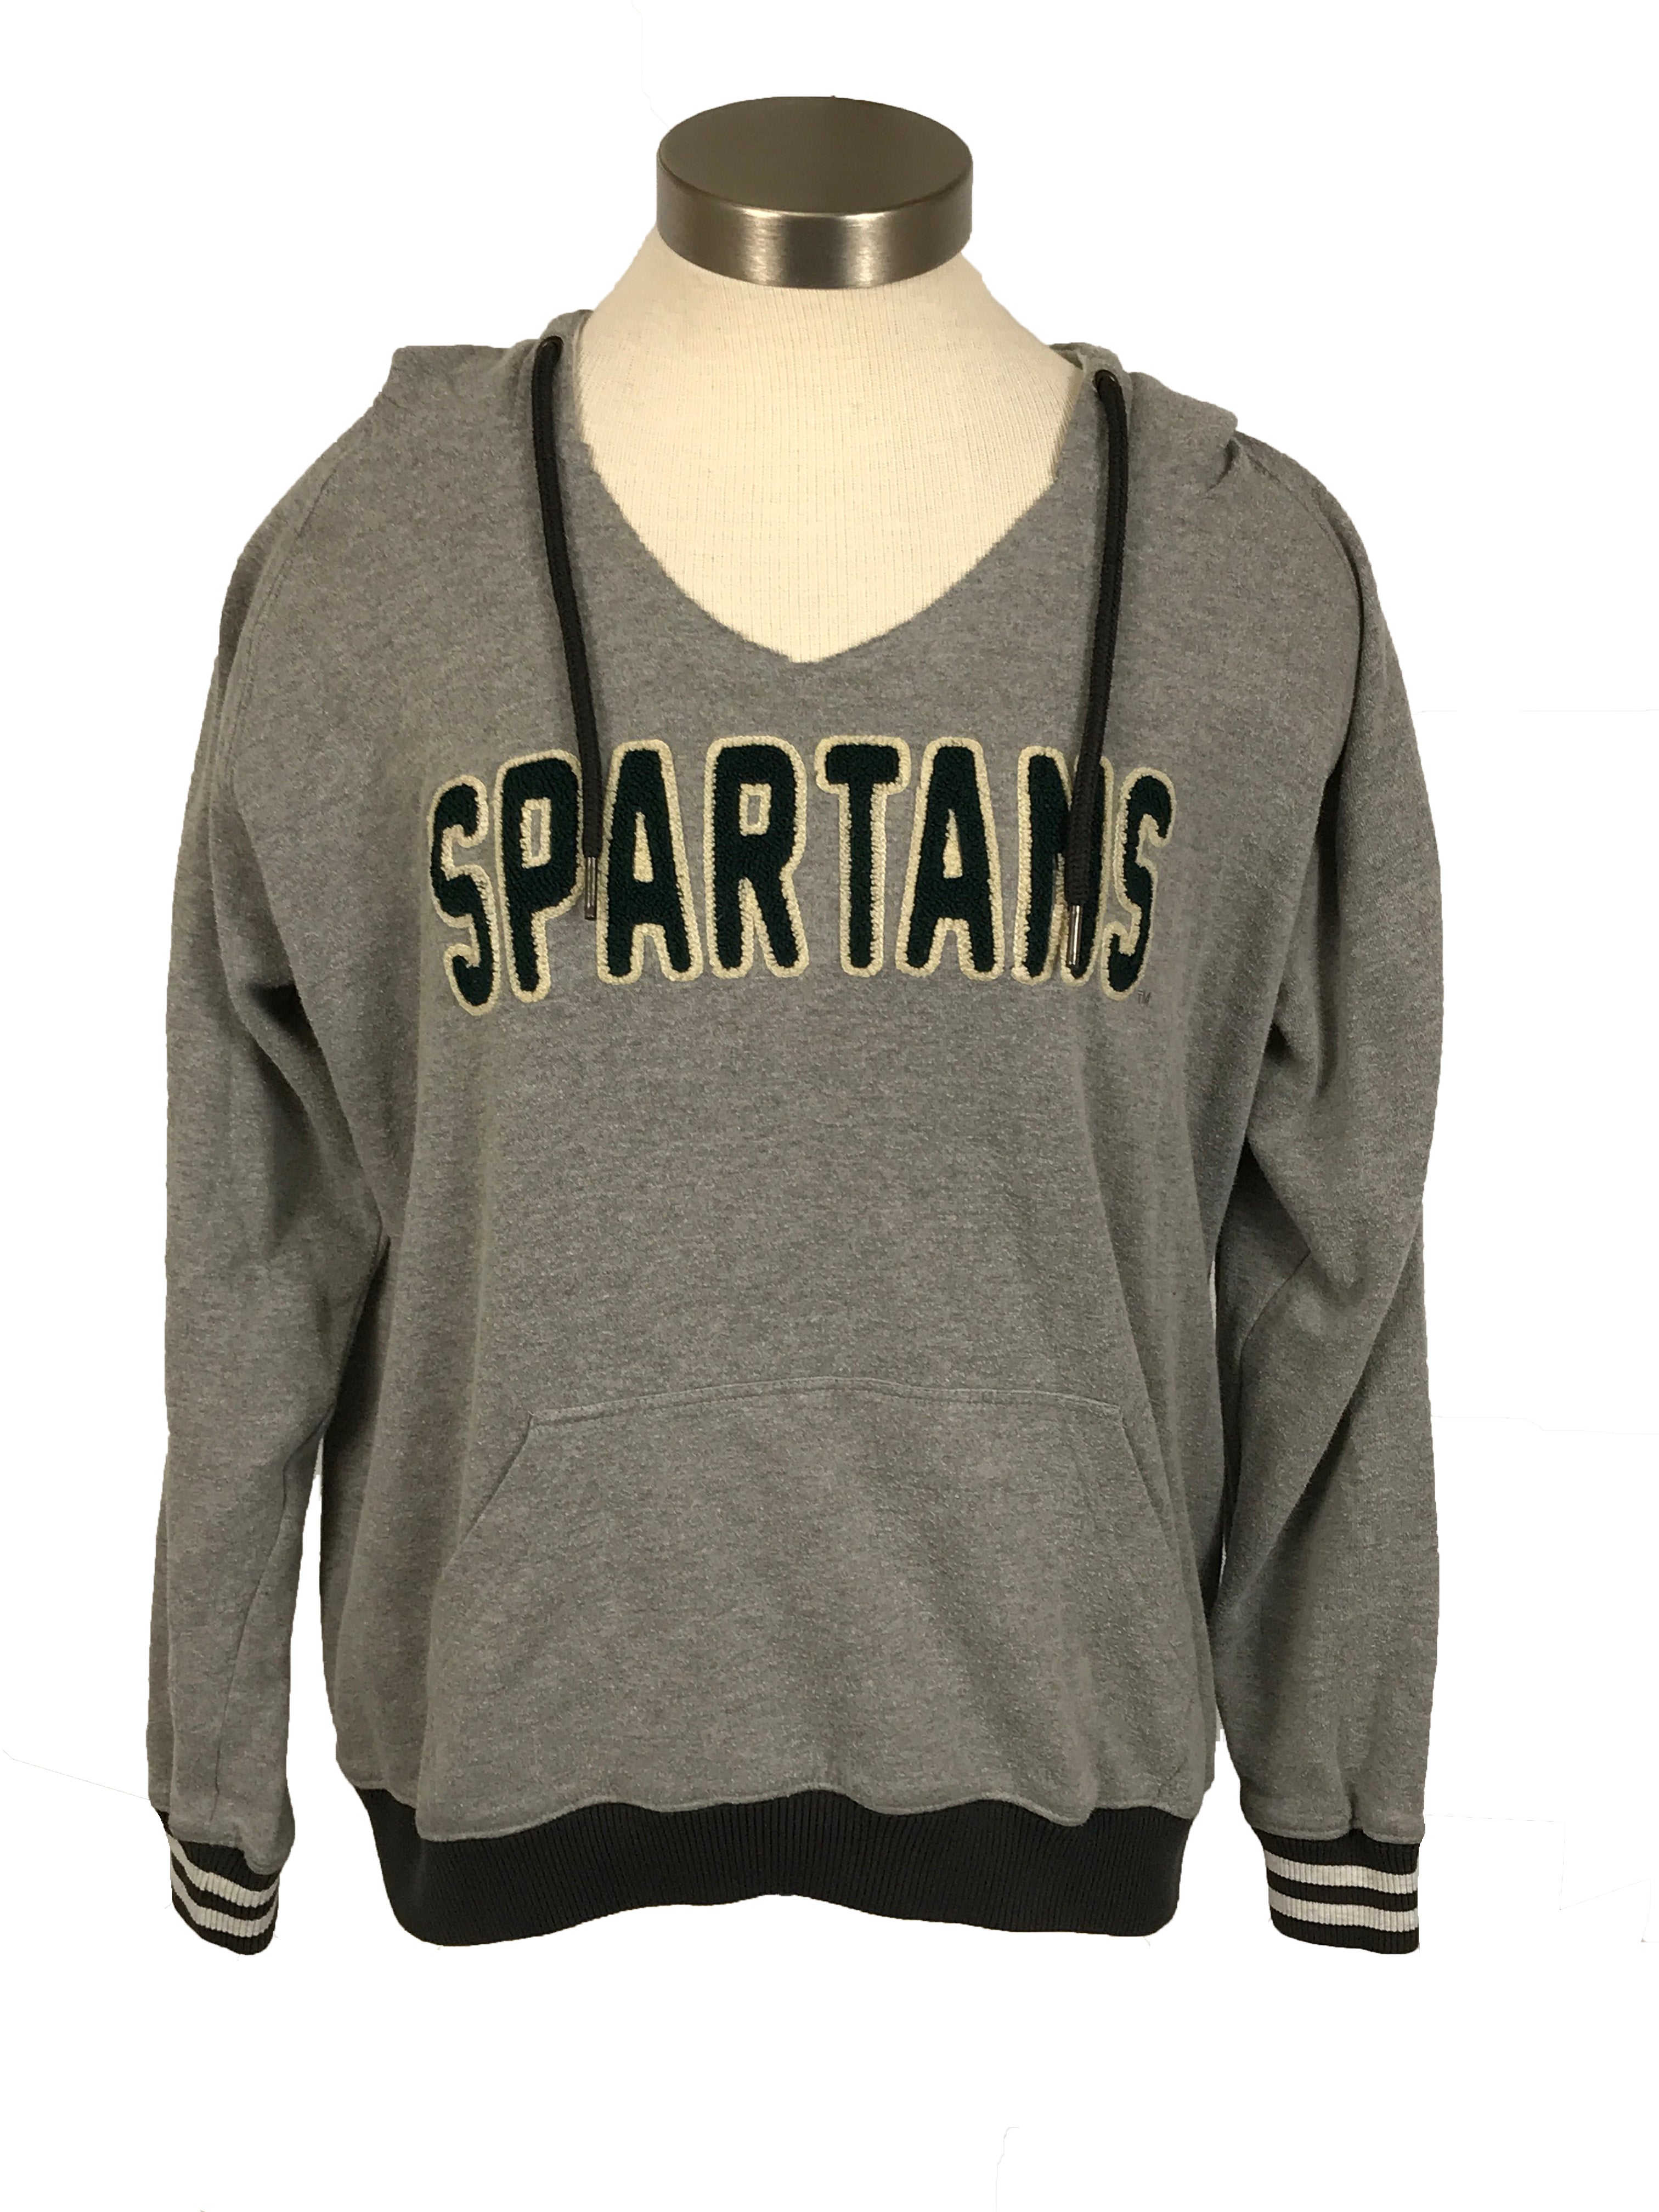 Michigan State University Gray "Spartans" Hoodie Women's Size Large